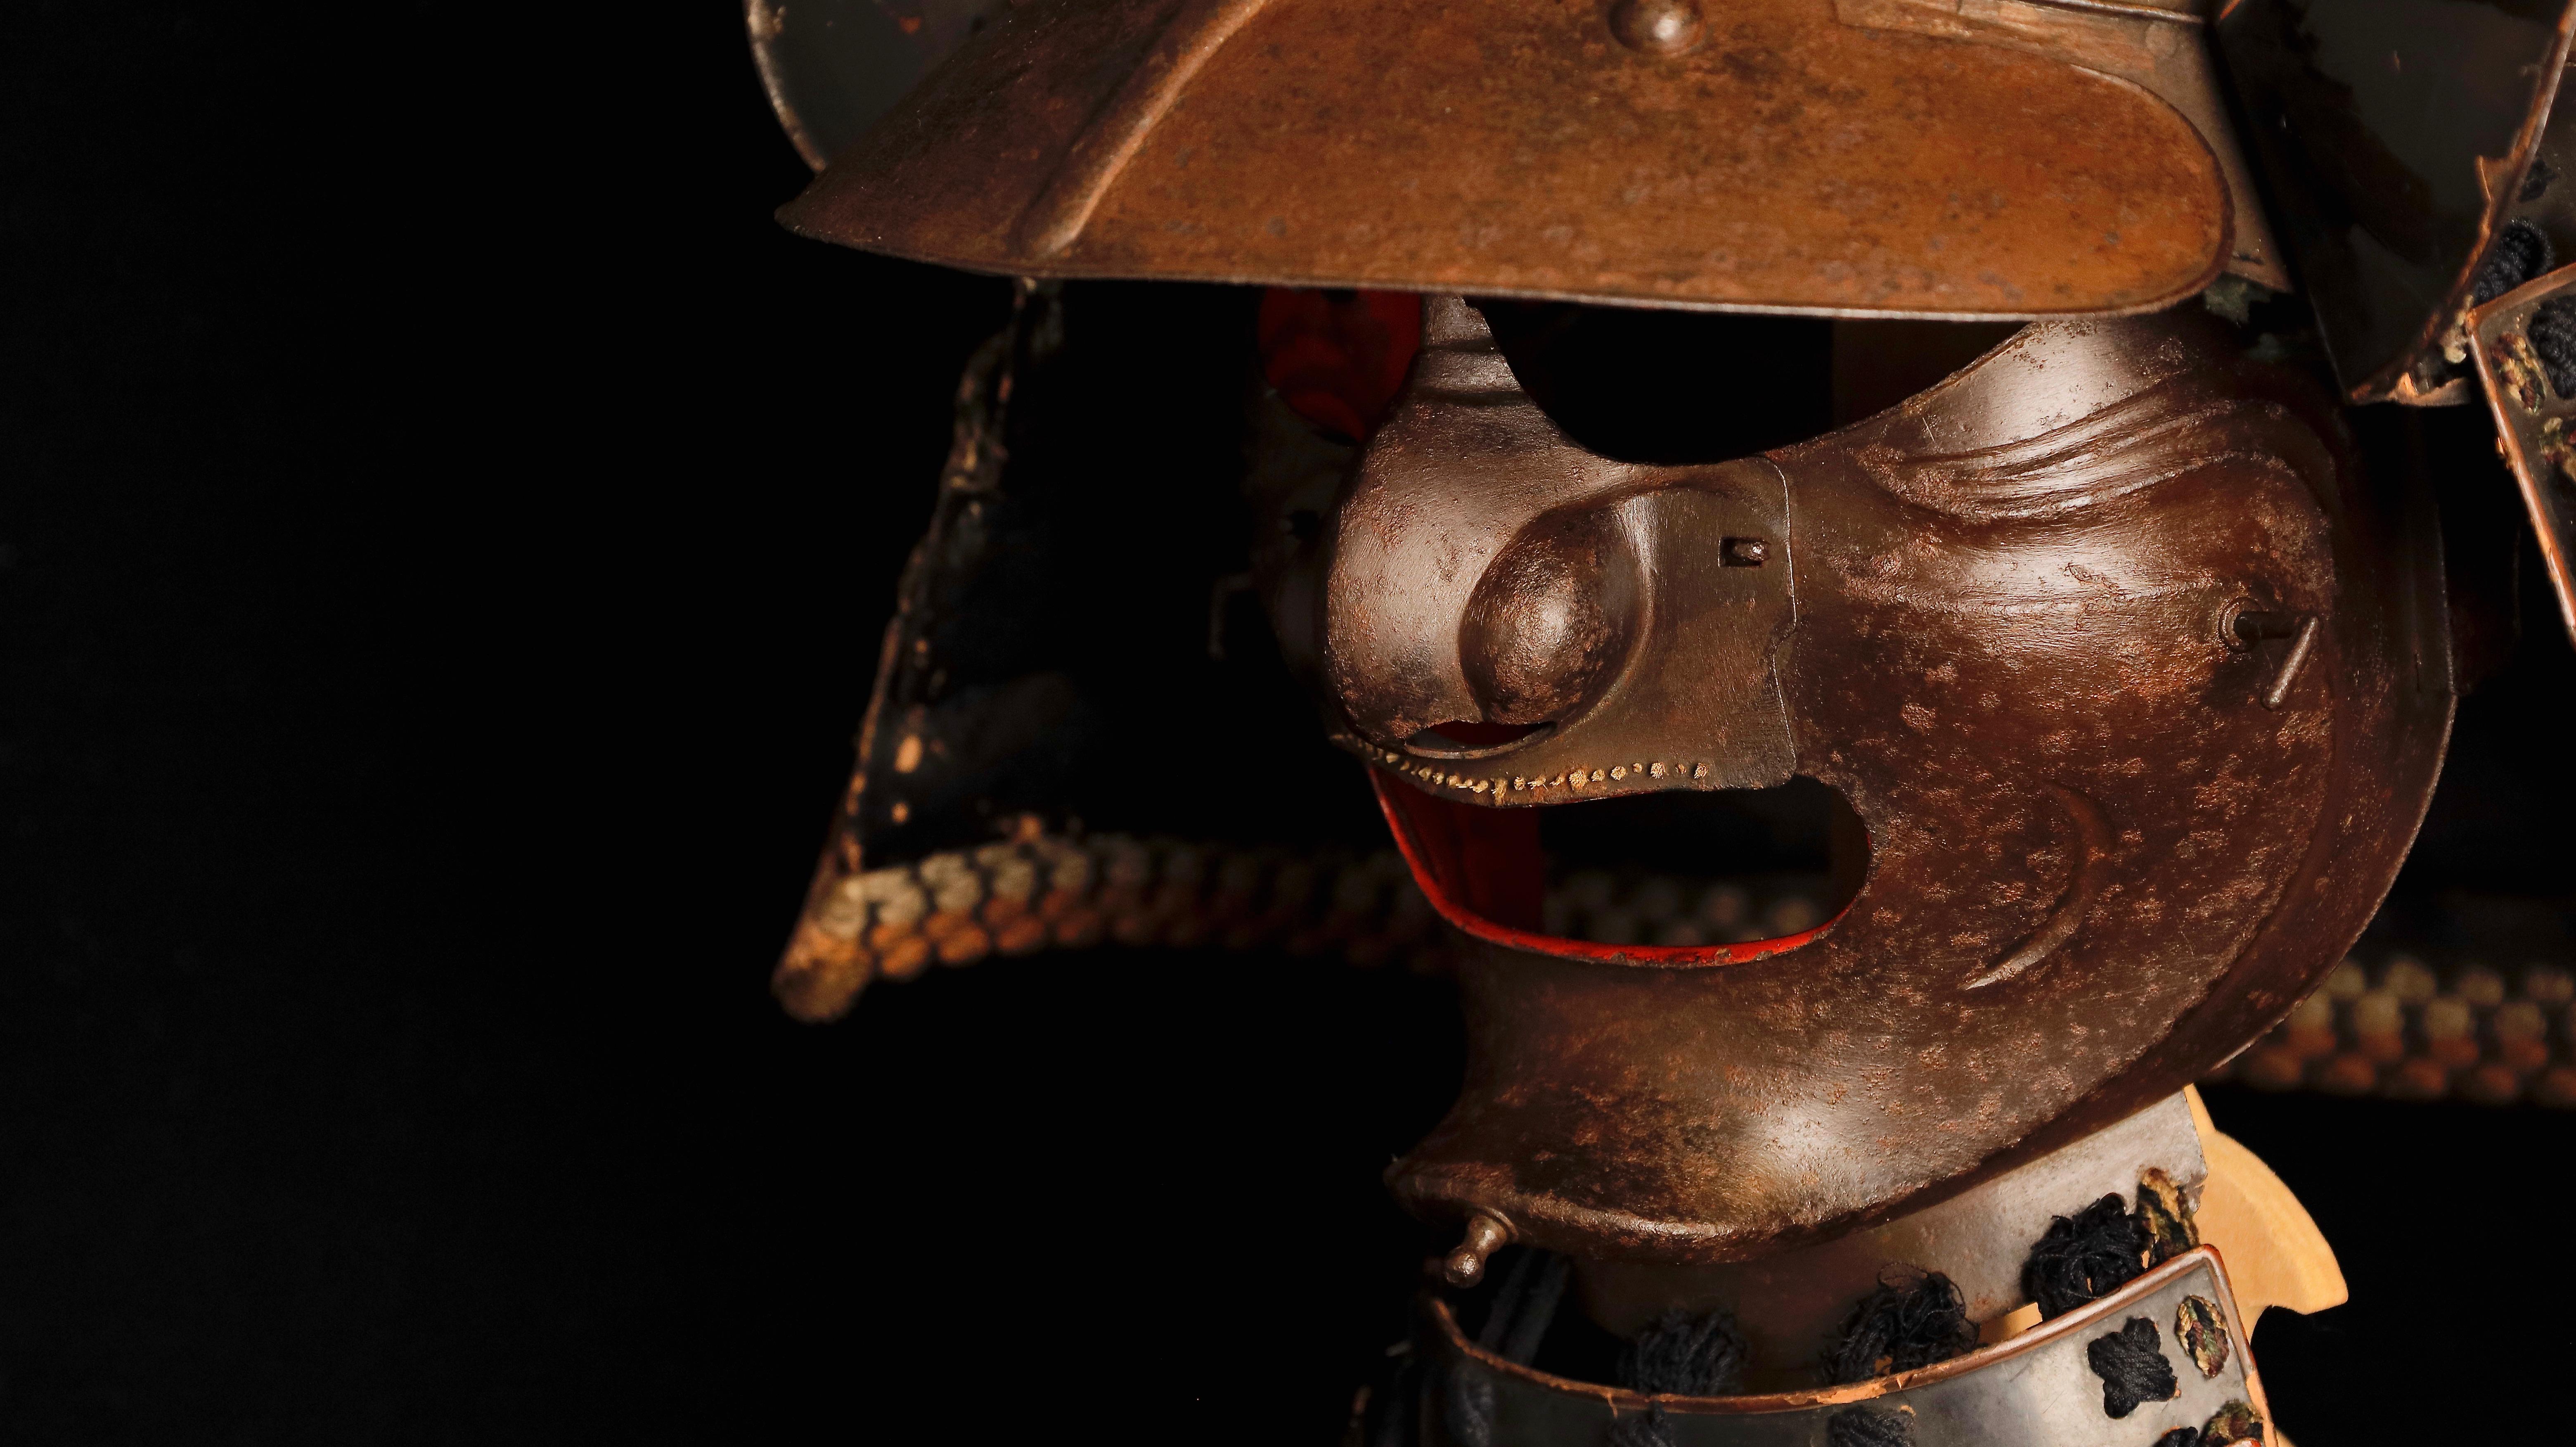 Edo-Era Samurai Helmet and Mask Set, an Authentic Piece of History from the 17th 2